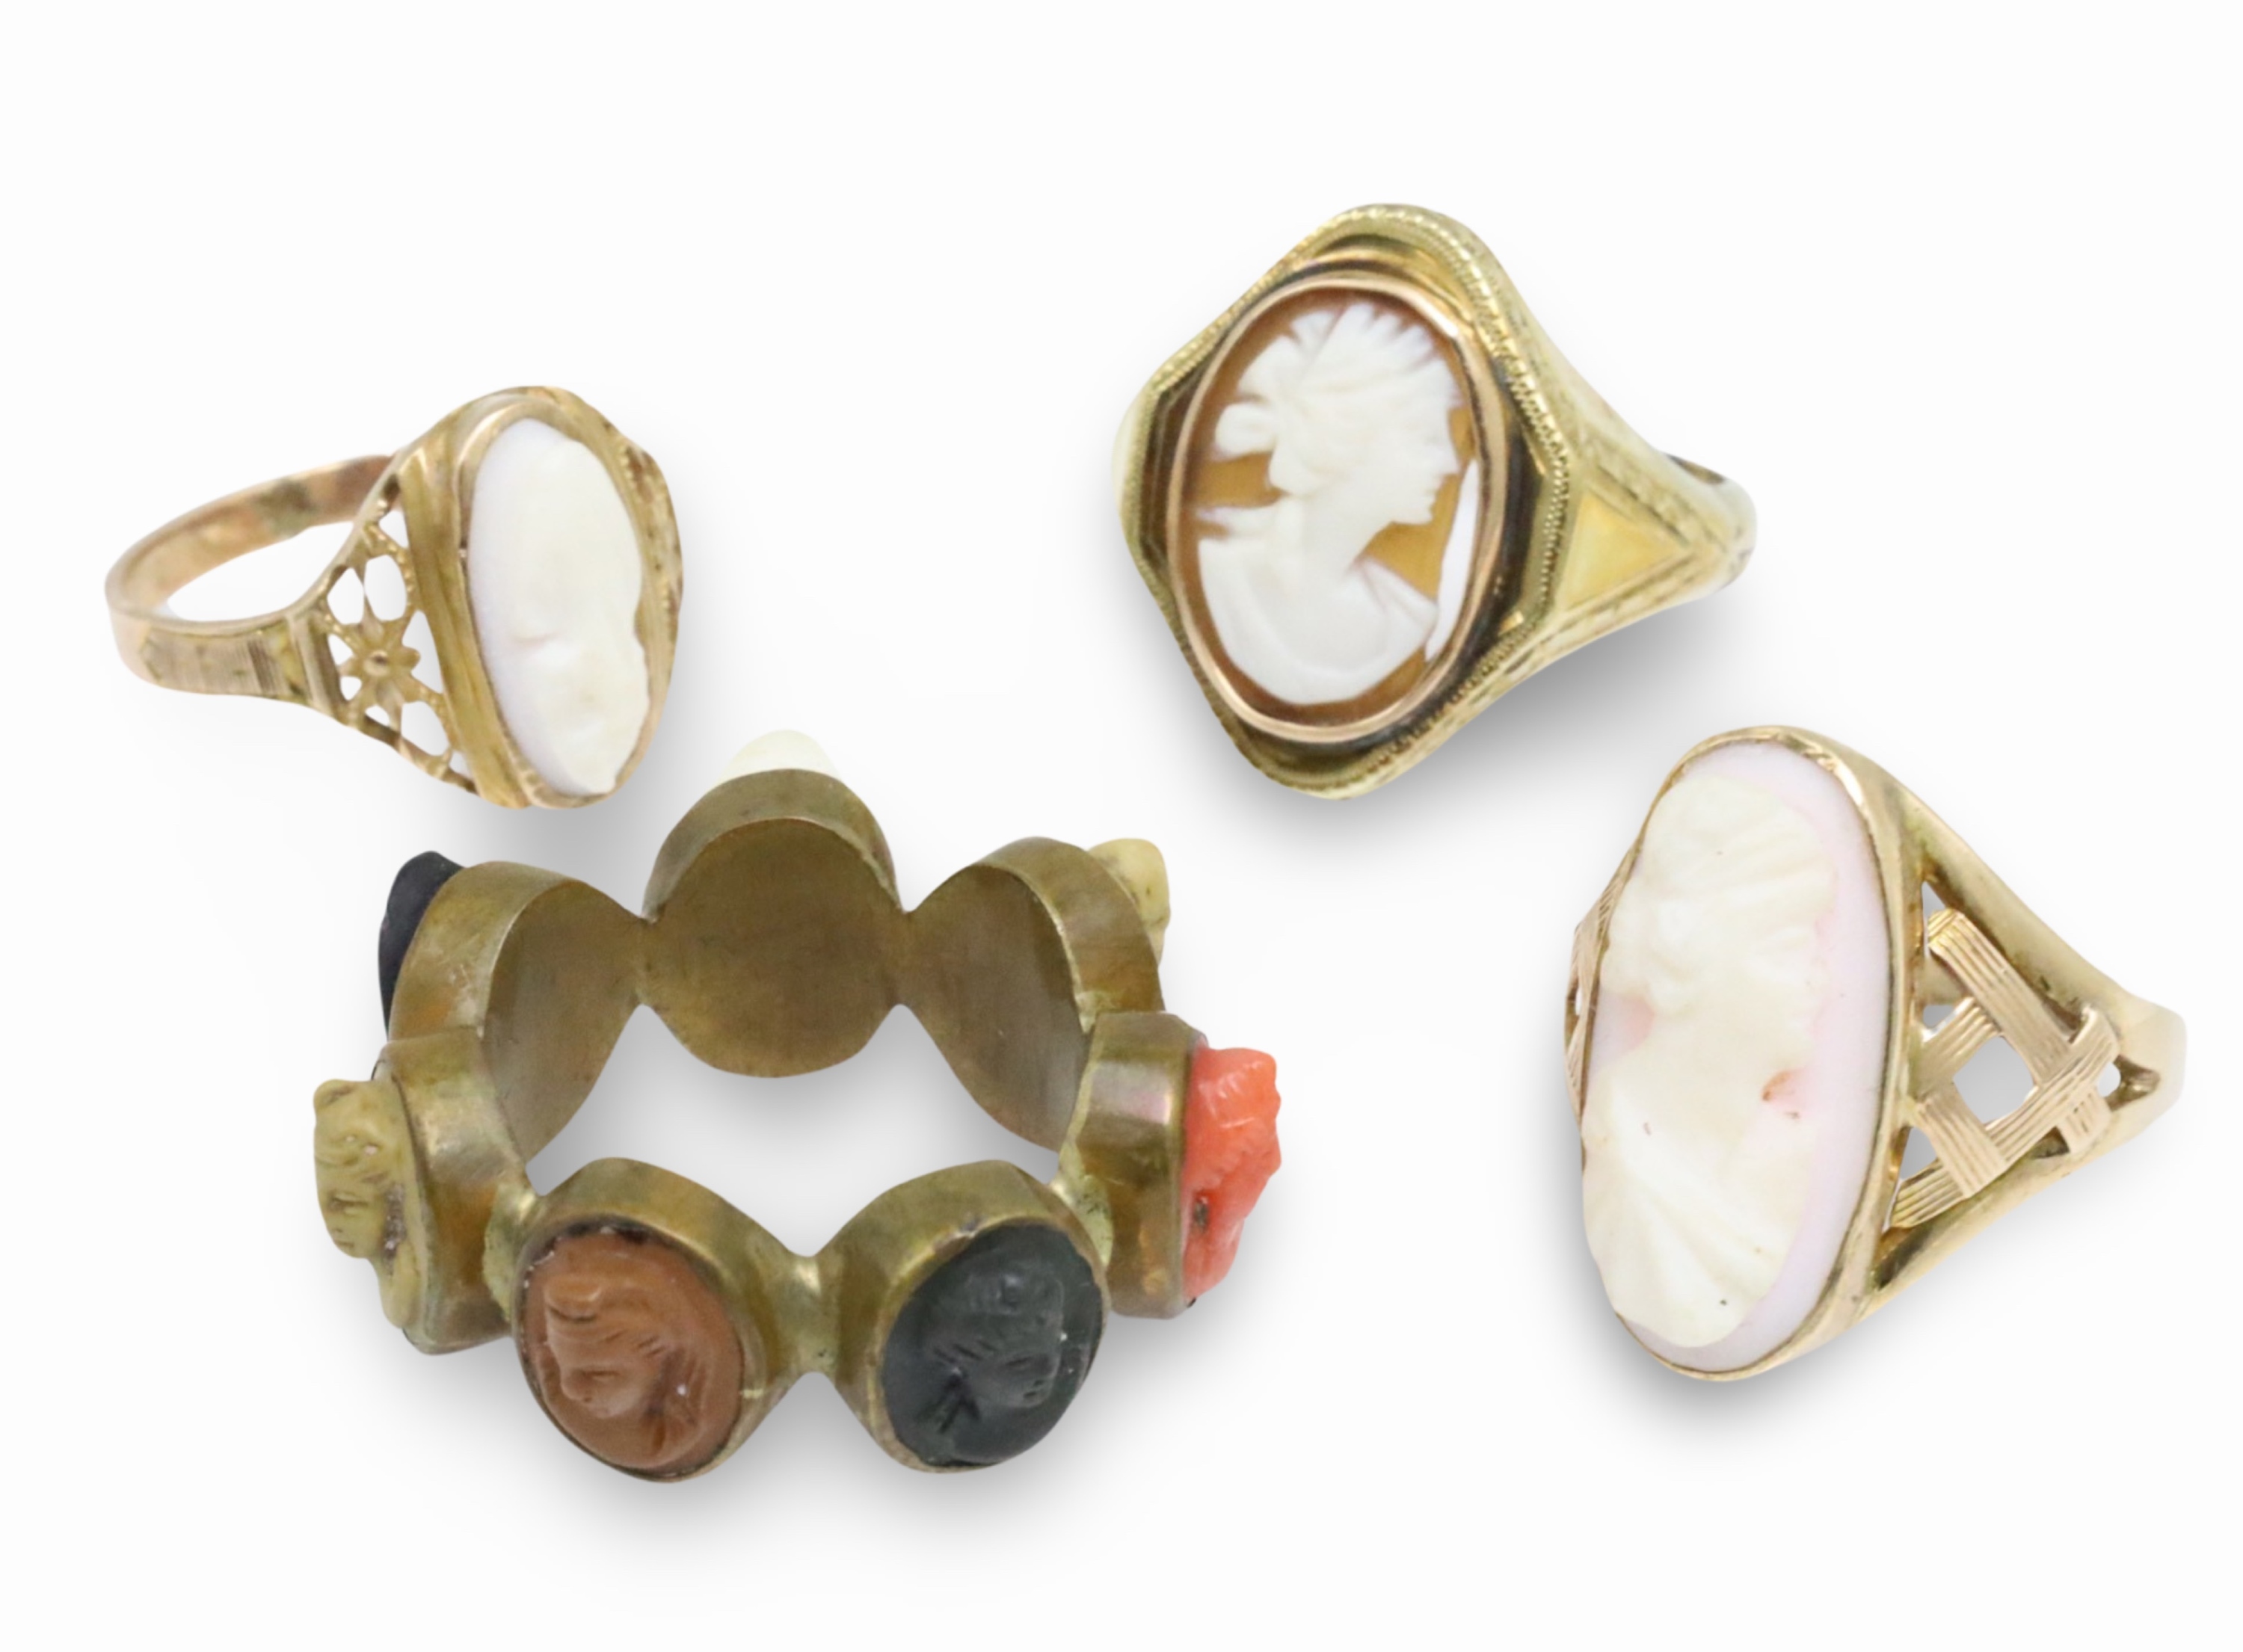 FOUR 10K YELLOW GOLD CAMEO RINGS 3ccb0e